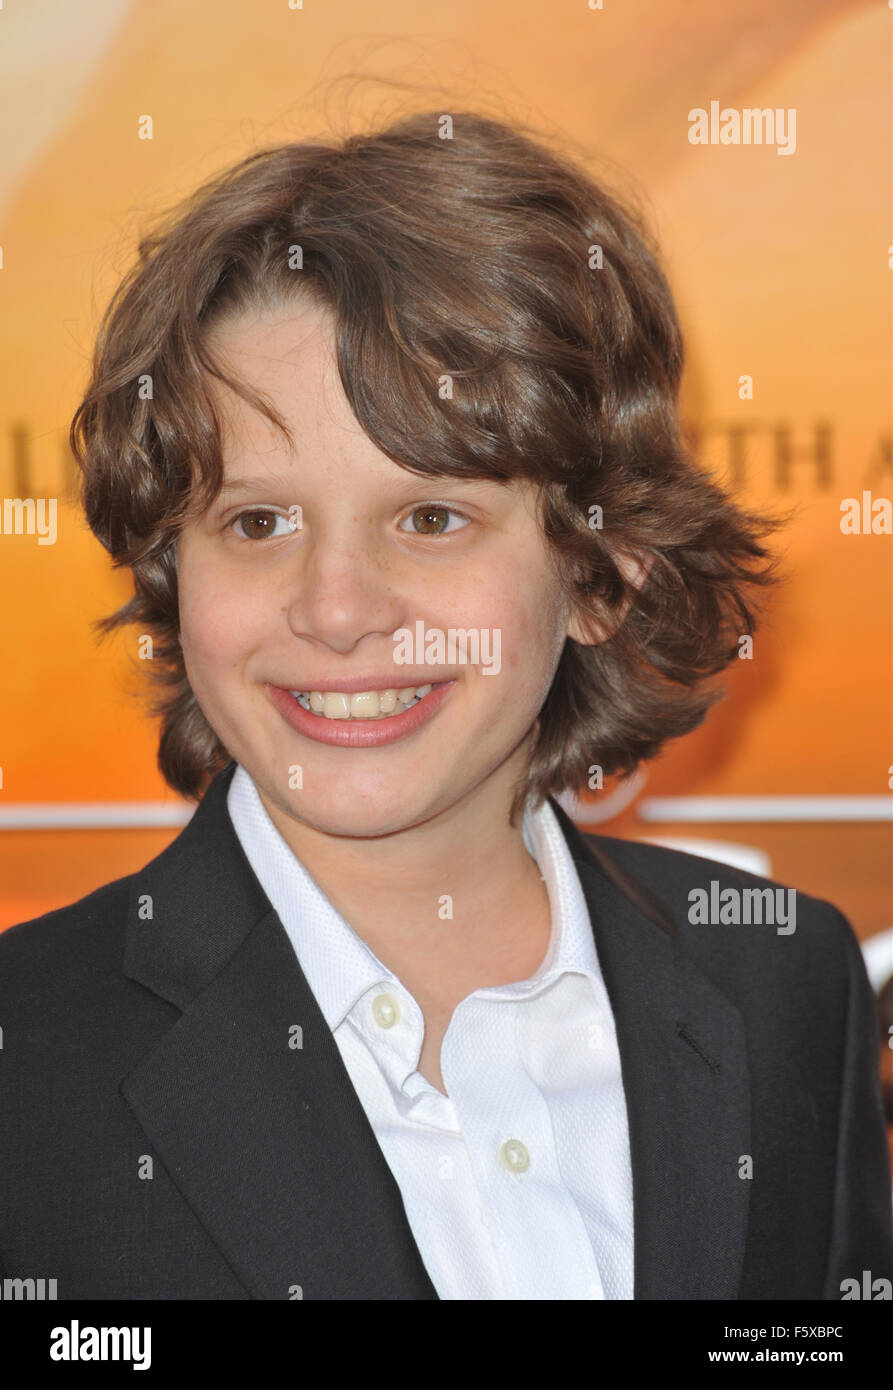 LOS ANGELES, CA - MARCH 25, 2010: Bobby Coleman at the world premiere of his new movie 'The Last Song' at the Arclight Theatre, Hollywood. Stock Photo